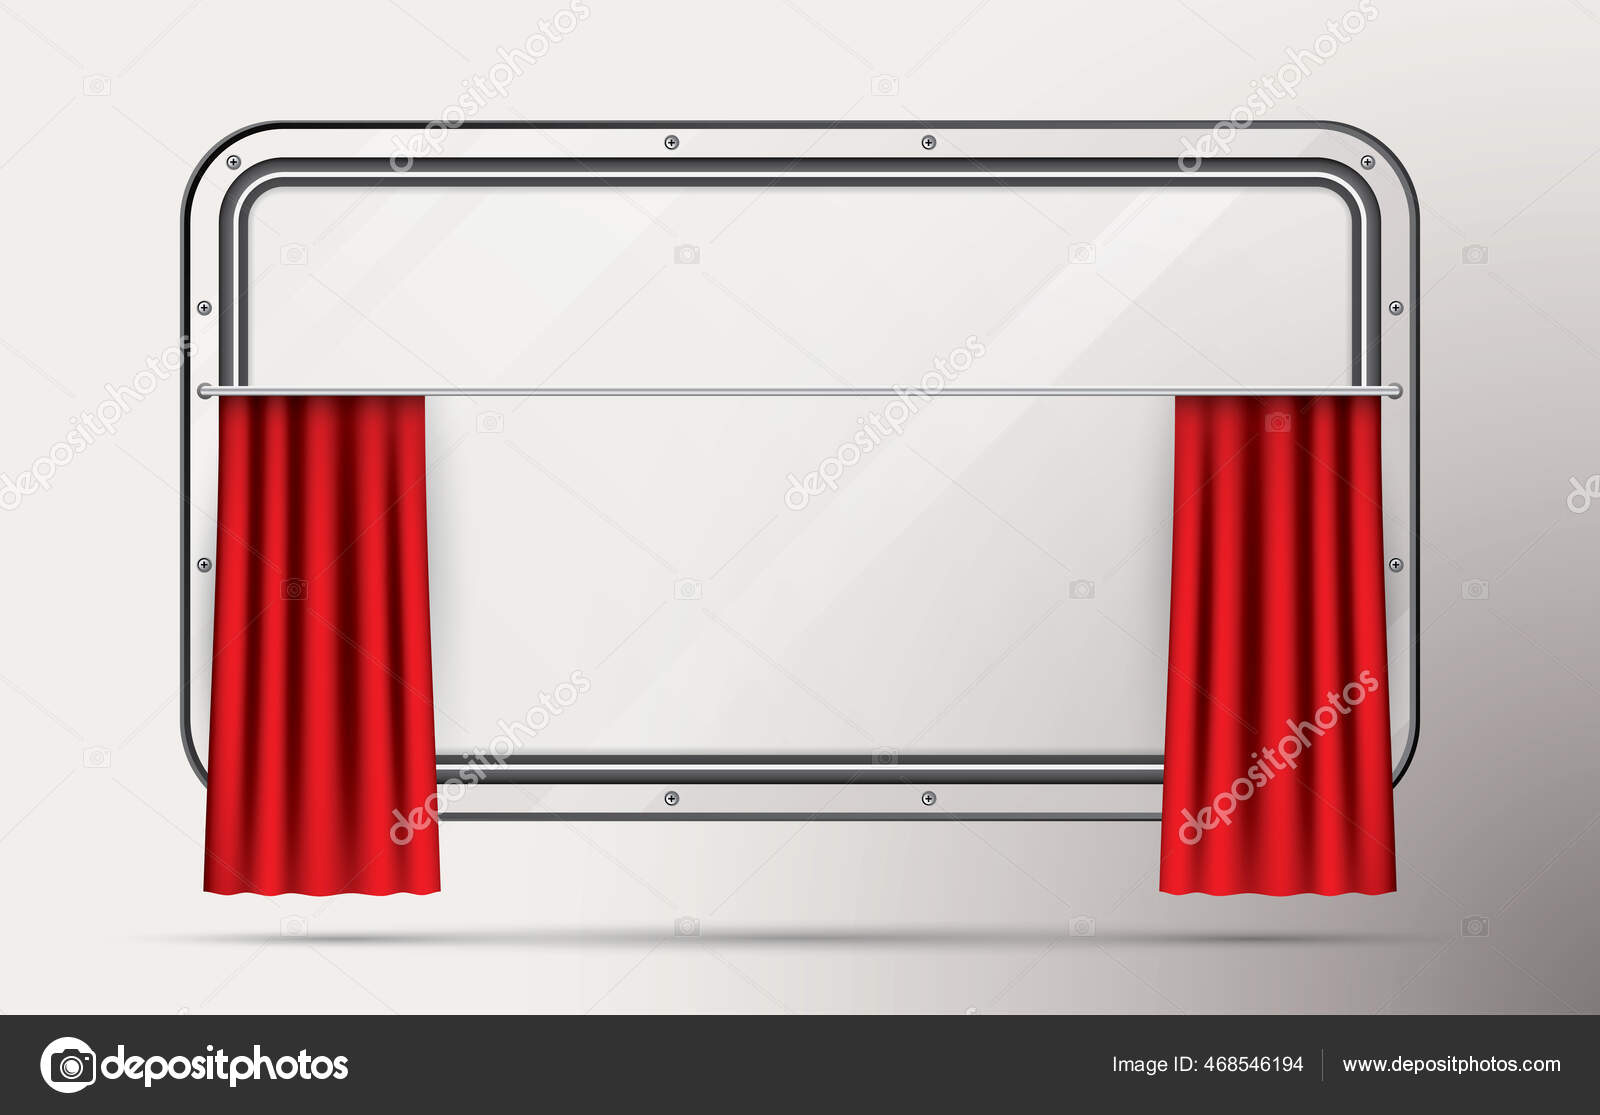 From the train window Vector Art Stock Images | Depositphotos